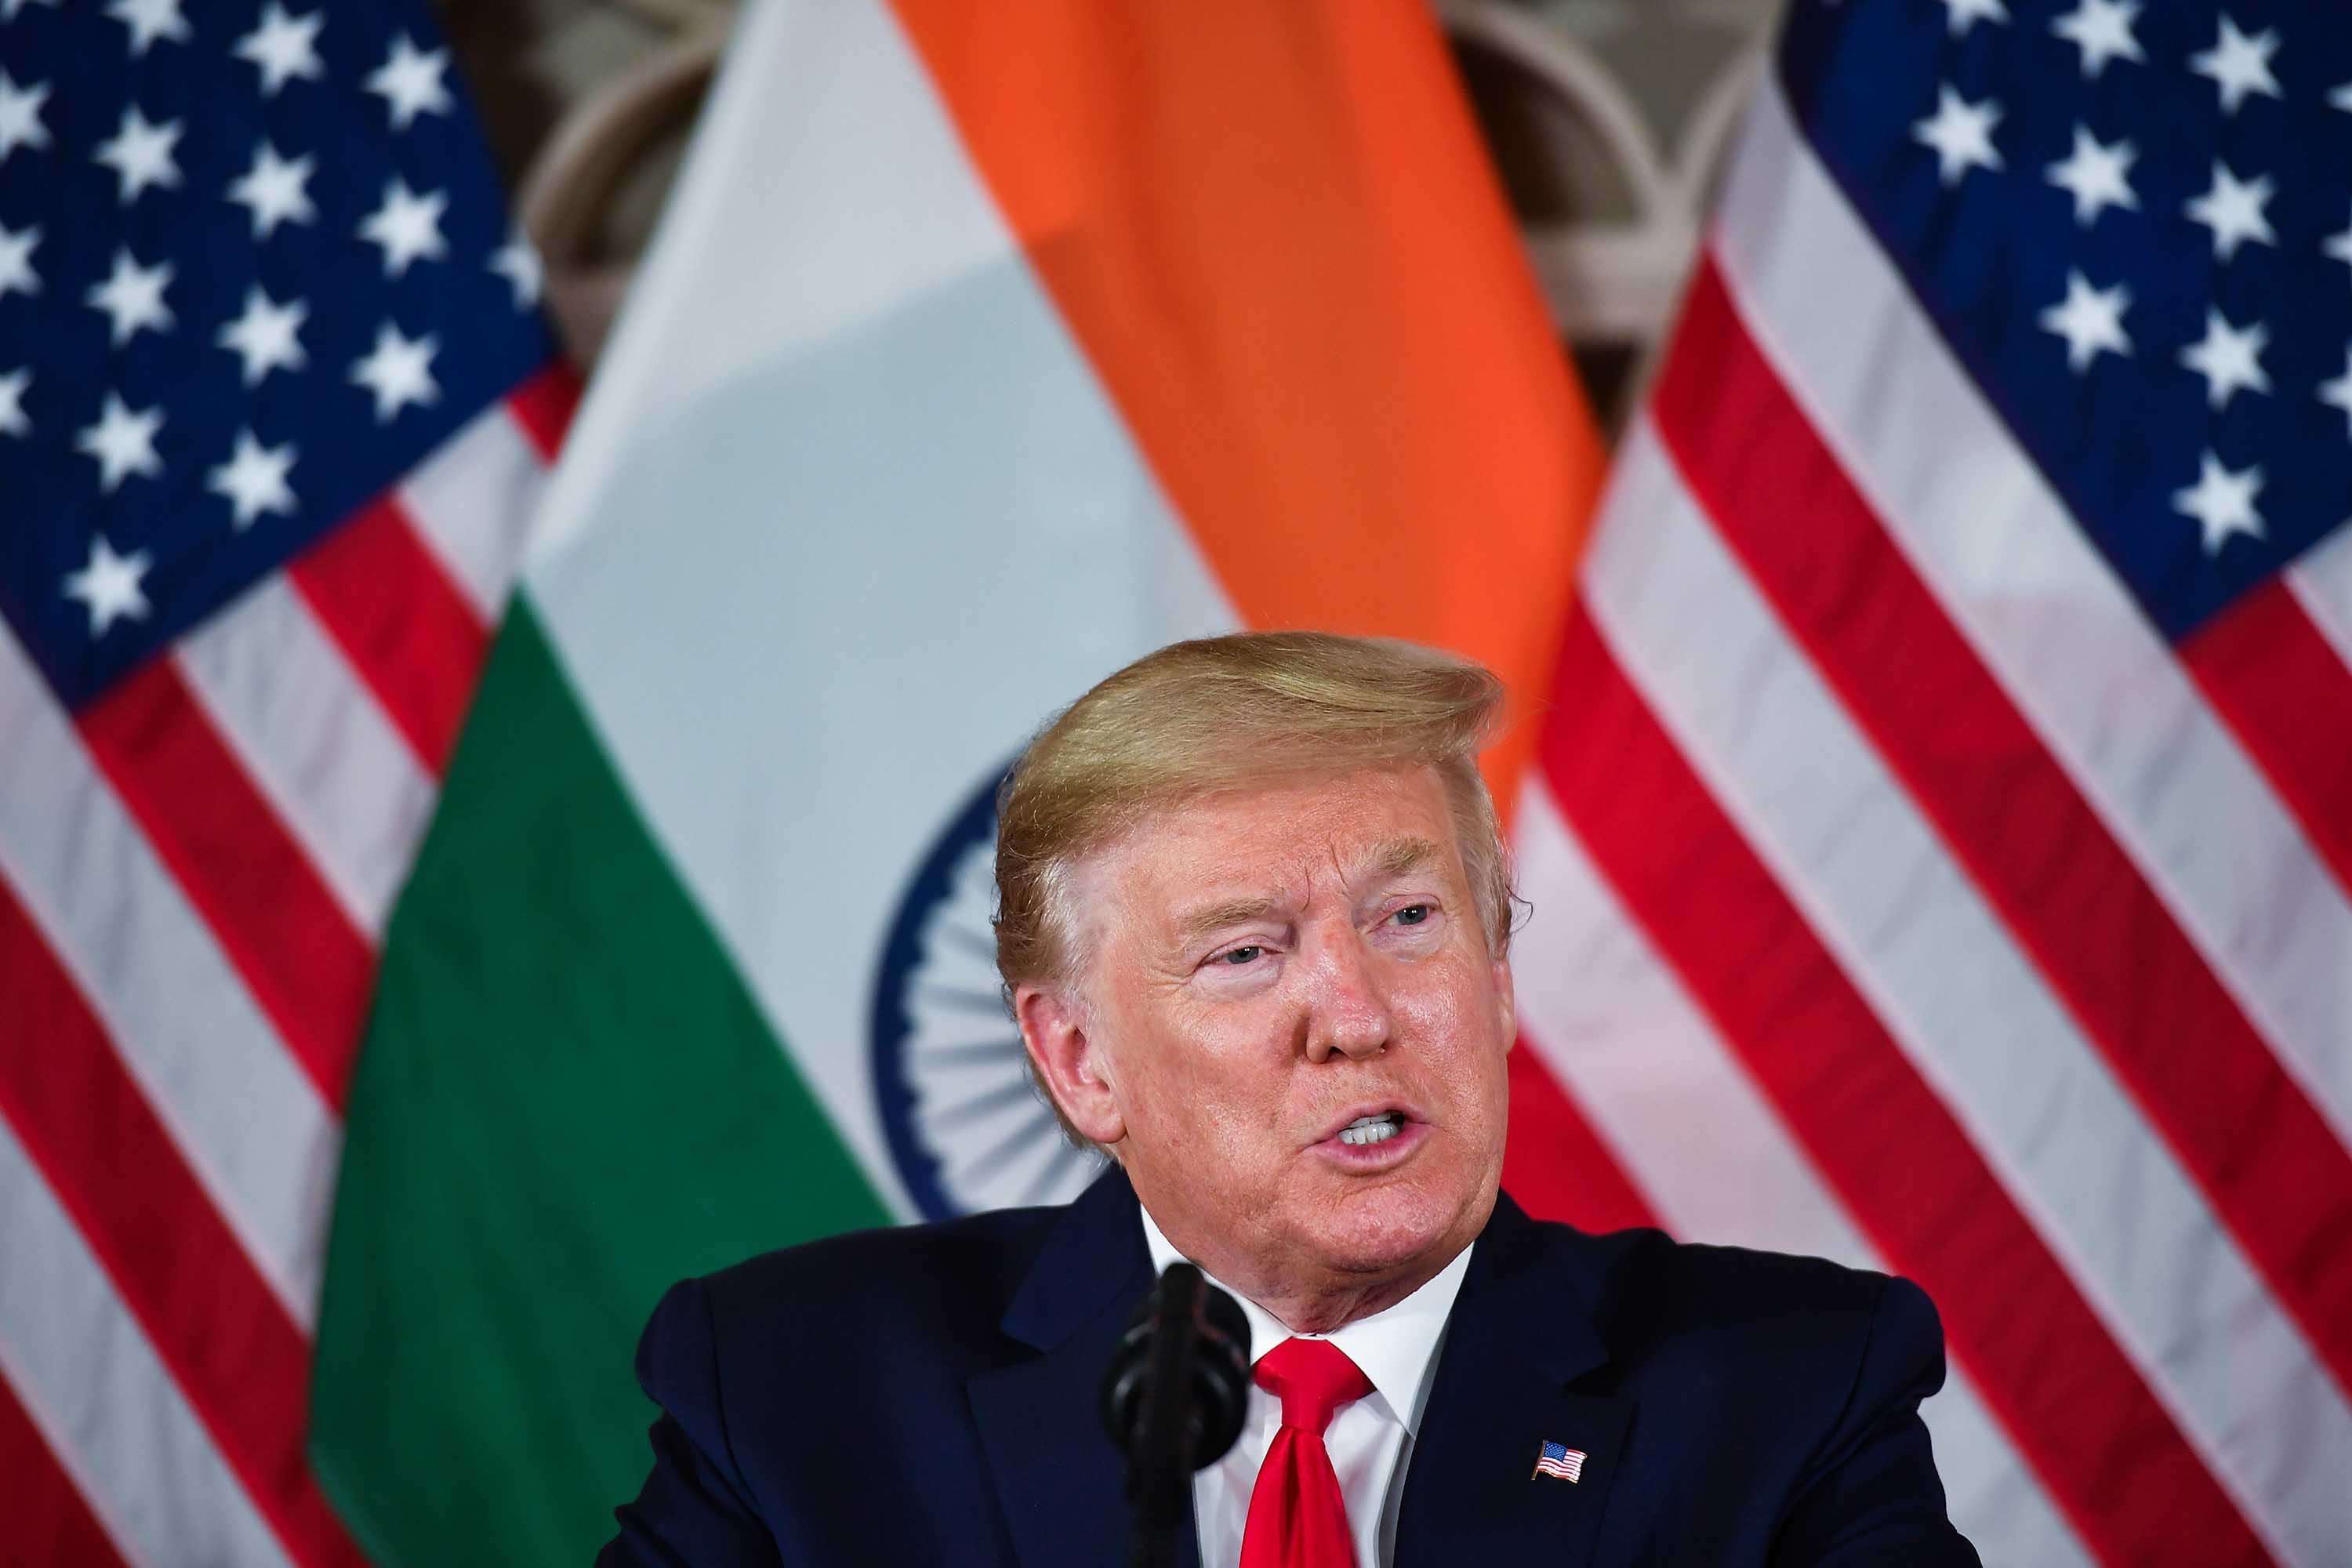 President Donald Trump speaks at a business roundtable in New Delhi, India, on Tuesday.